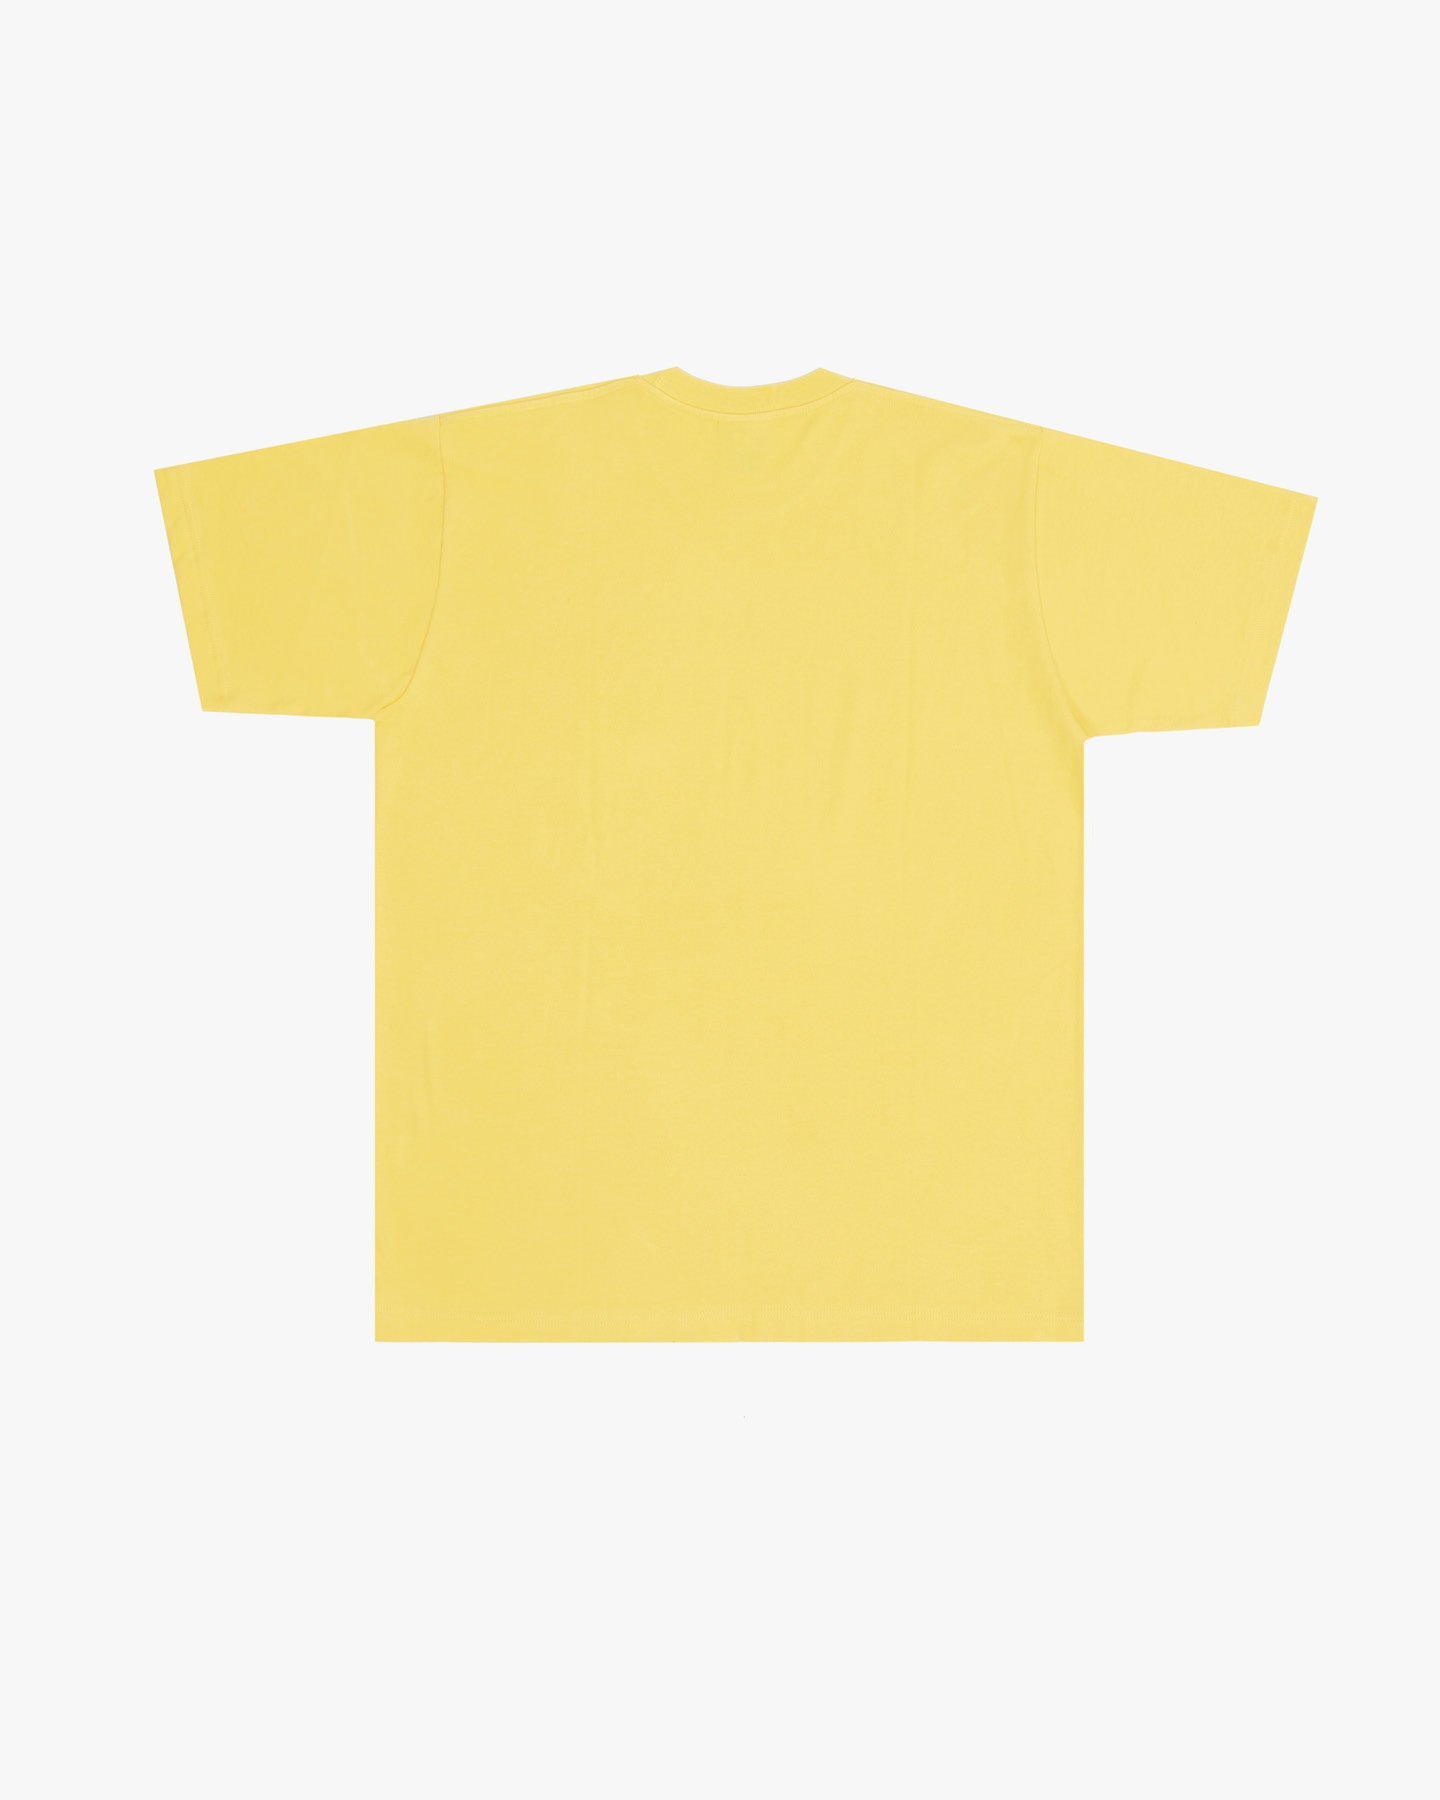 GOOD MORNING TAPES - All Welcome Home SS Tee Yellow